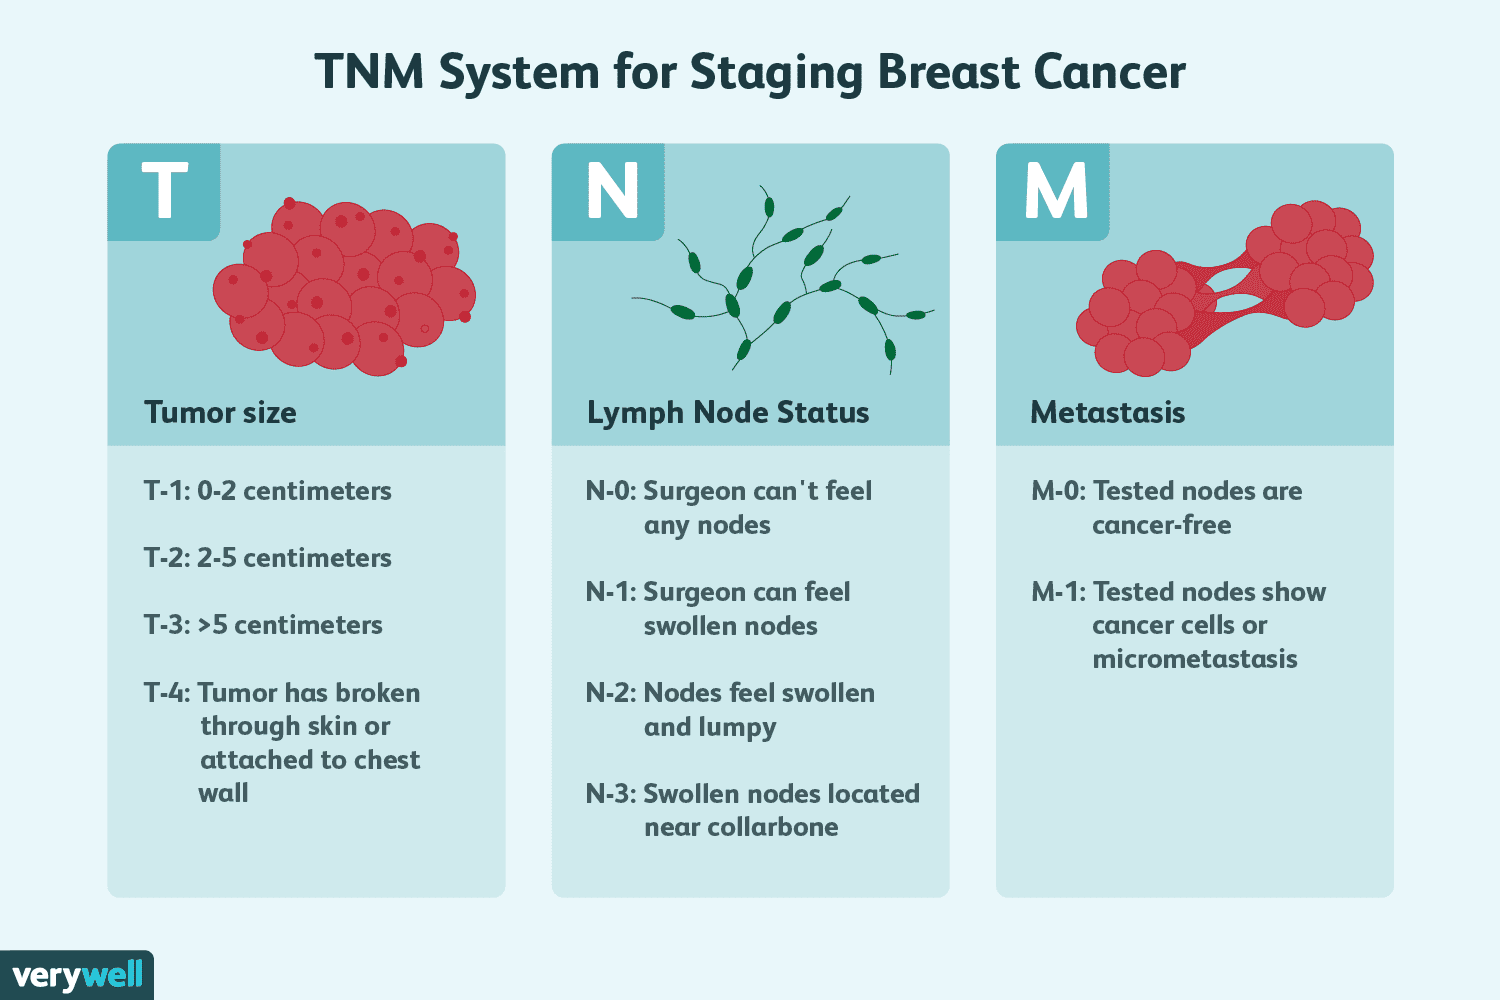 Stage 1 Breast Cancer: Diagnosis, Treatments, and Prognosis